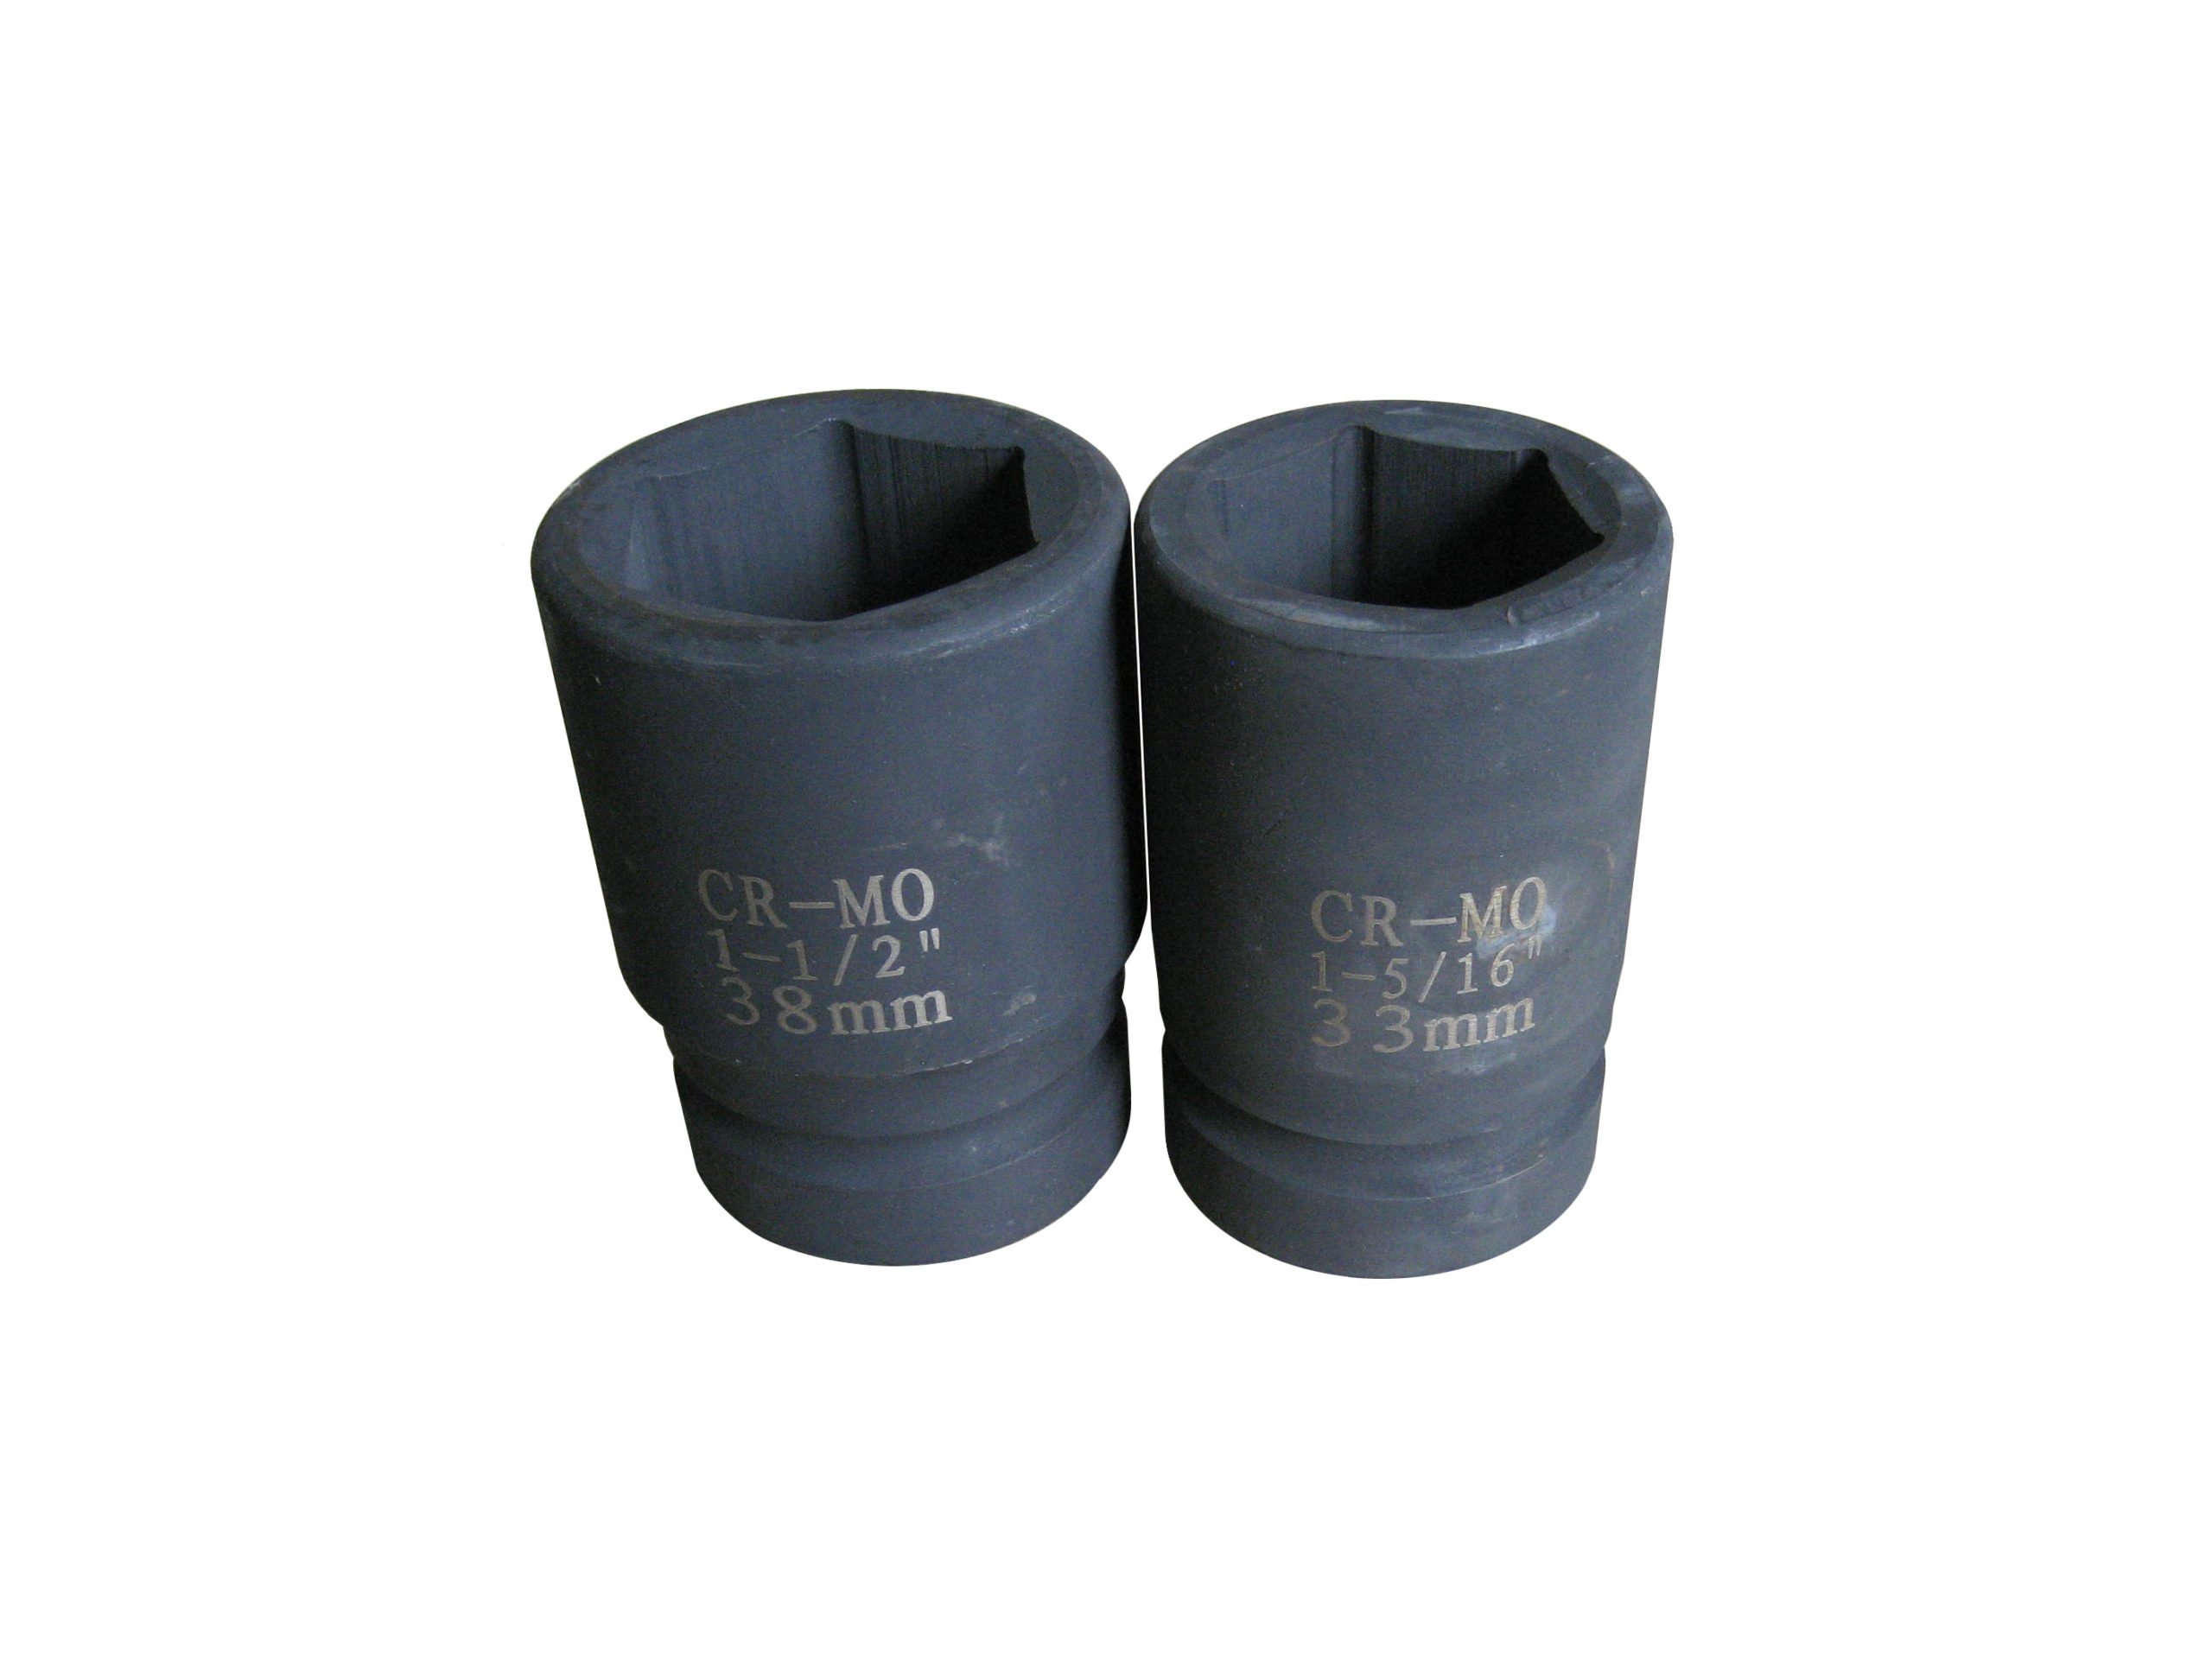 REPLACEMENT SOCKET FOR NUT BUSTER TOOL 1-5/16